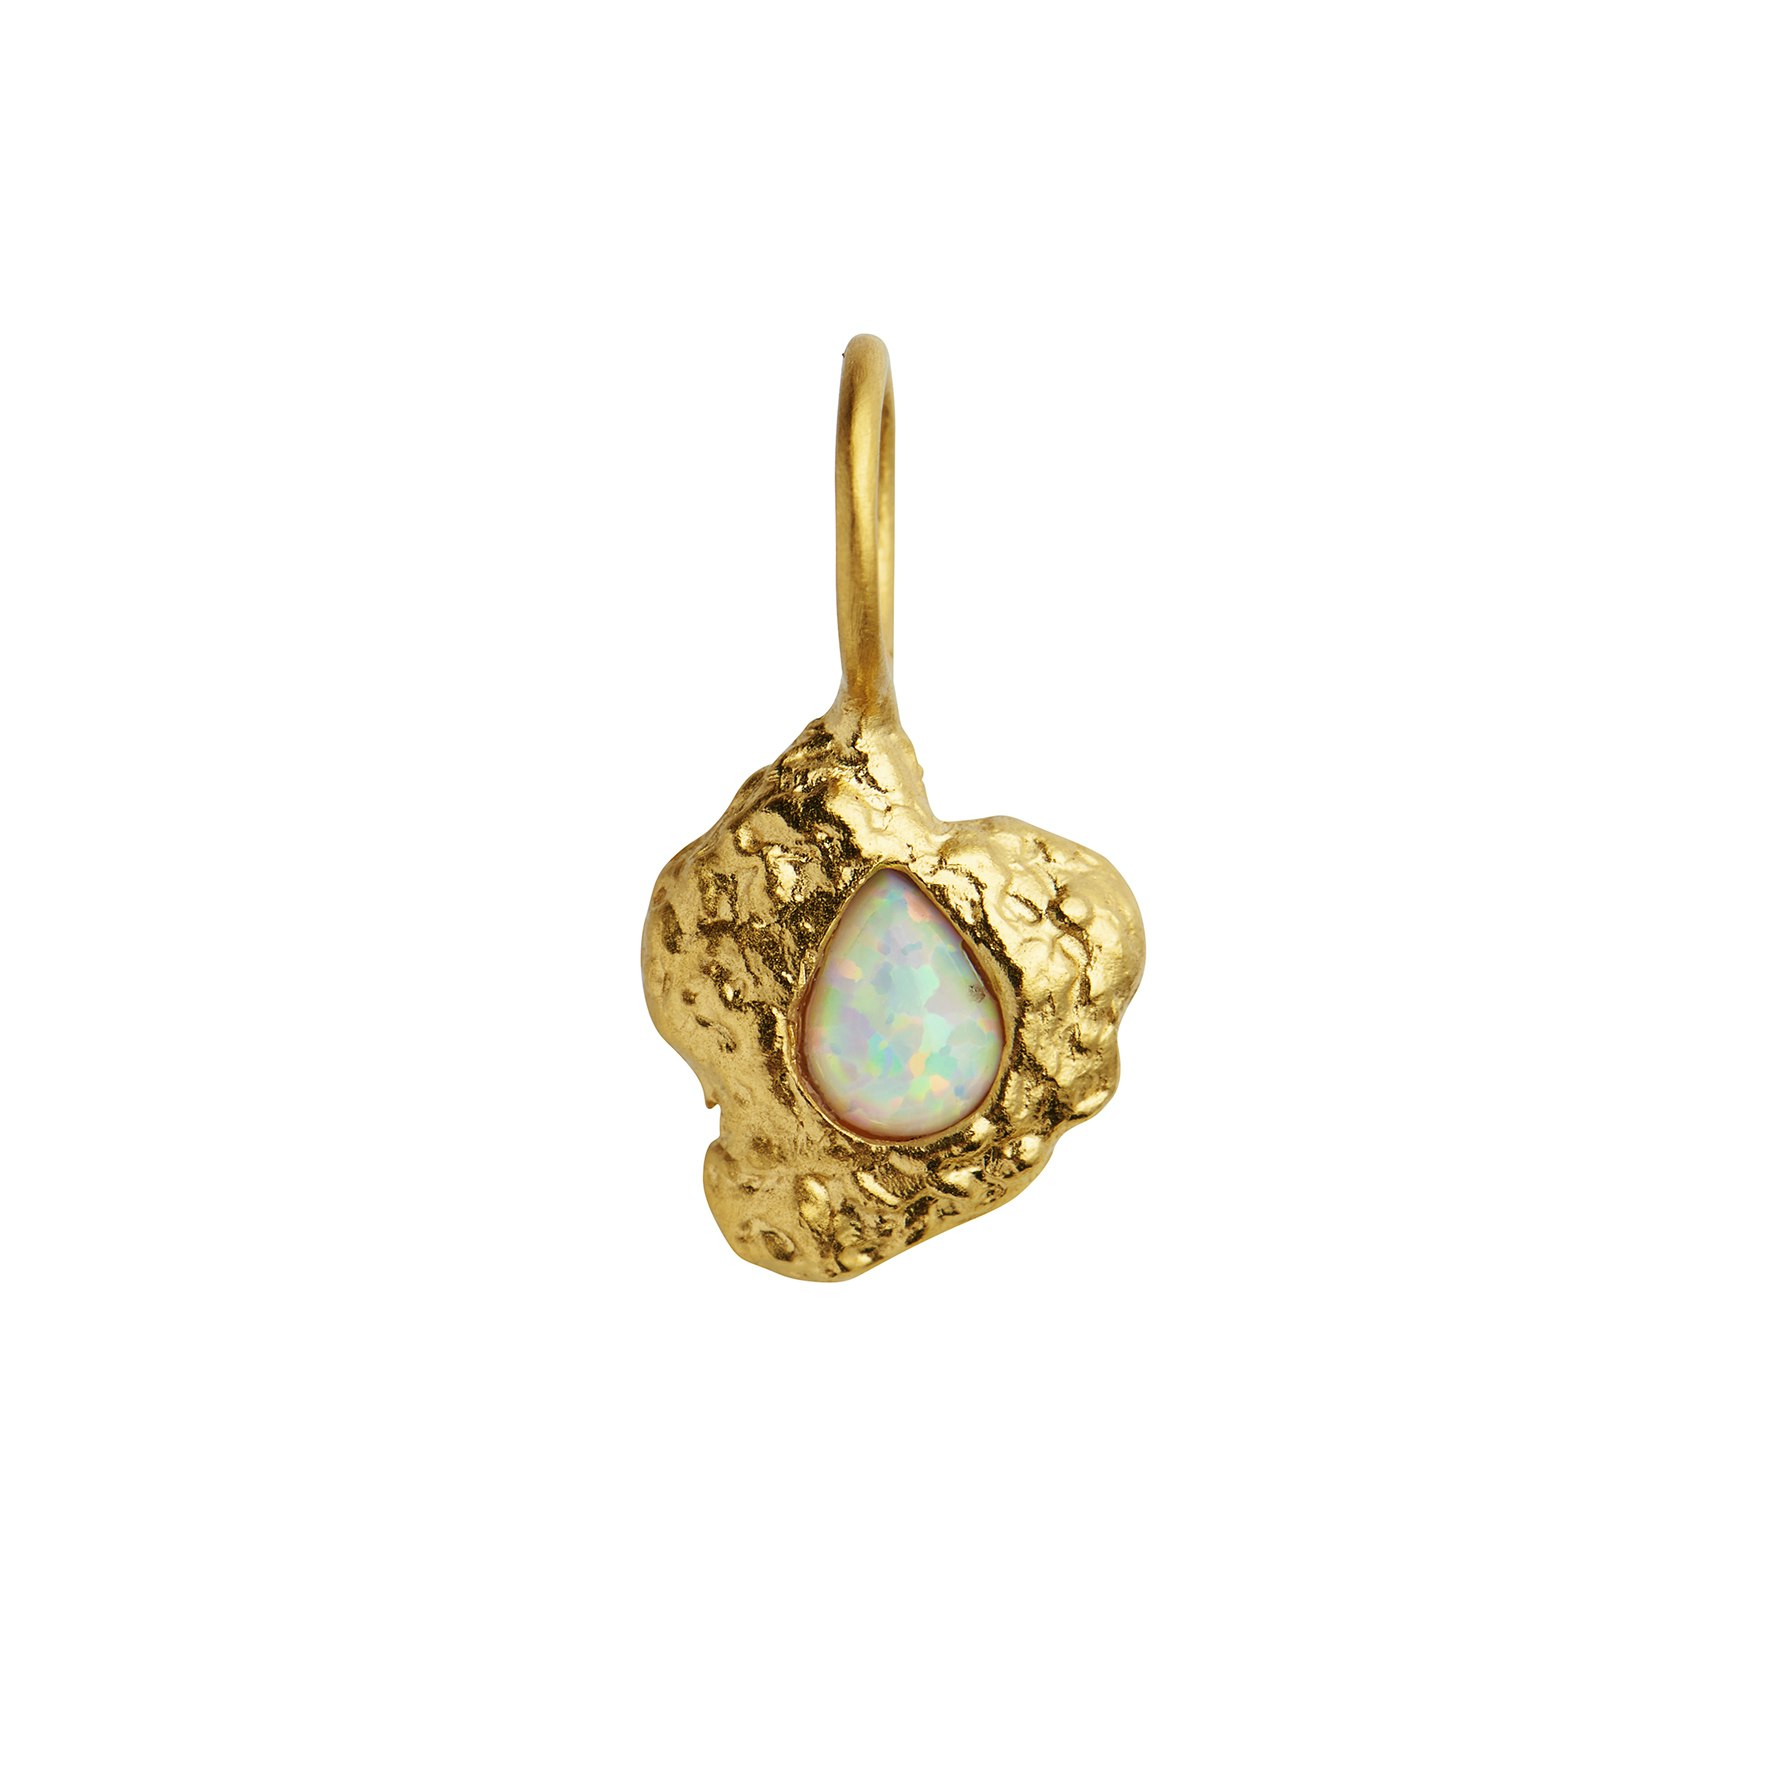 Ocean Glimpse Pendant With Opal van STINE A Jewelry in Verguld-Zilver Sterling 925